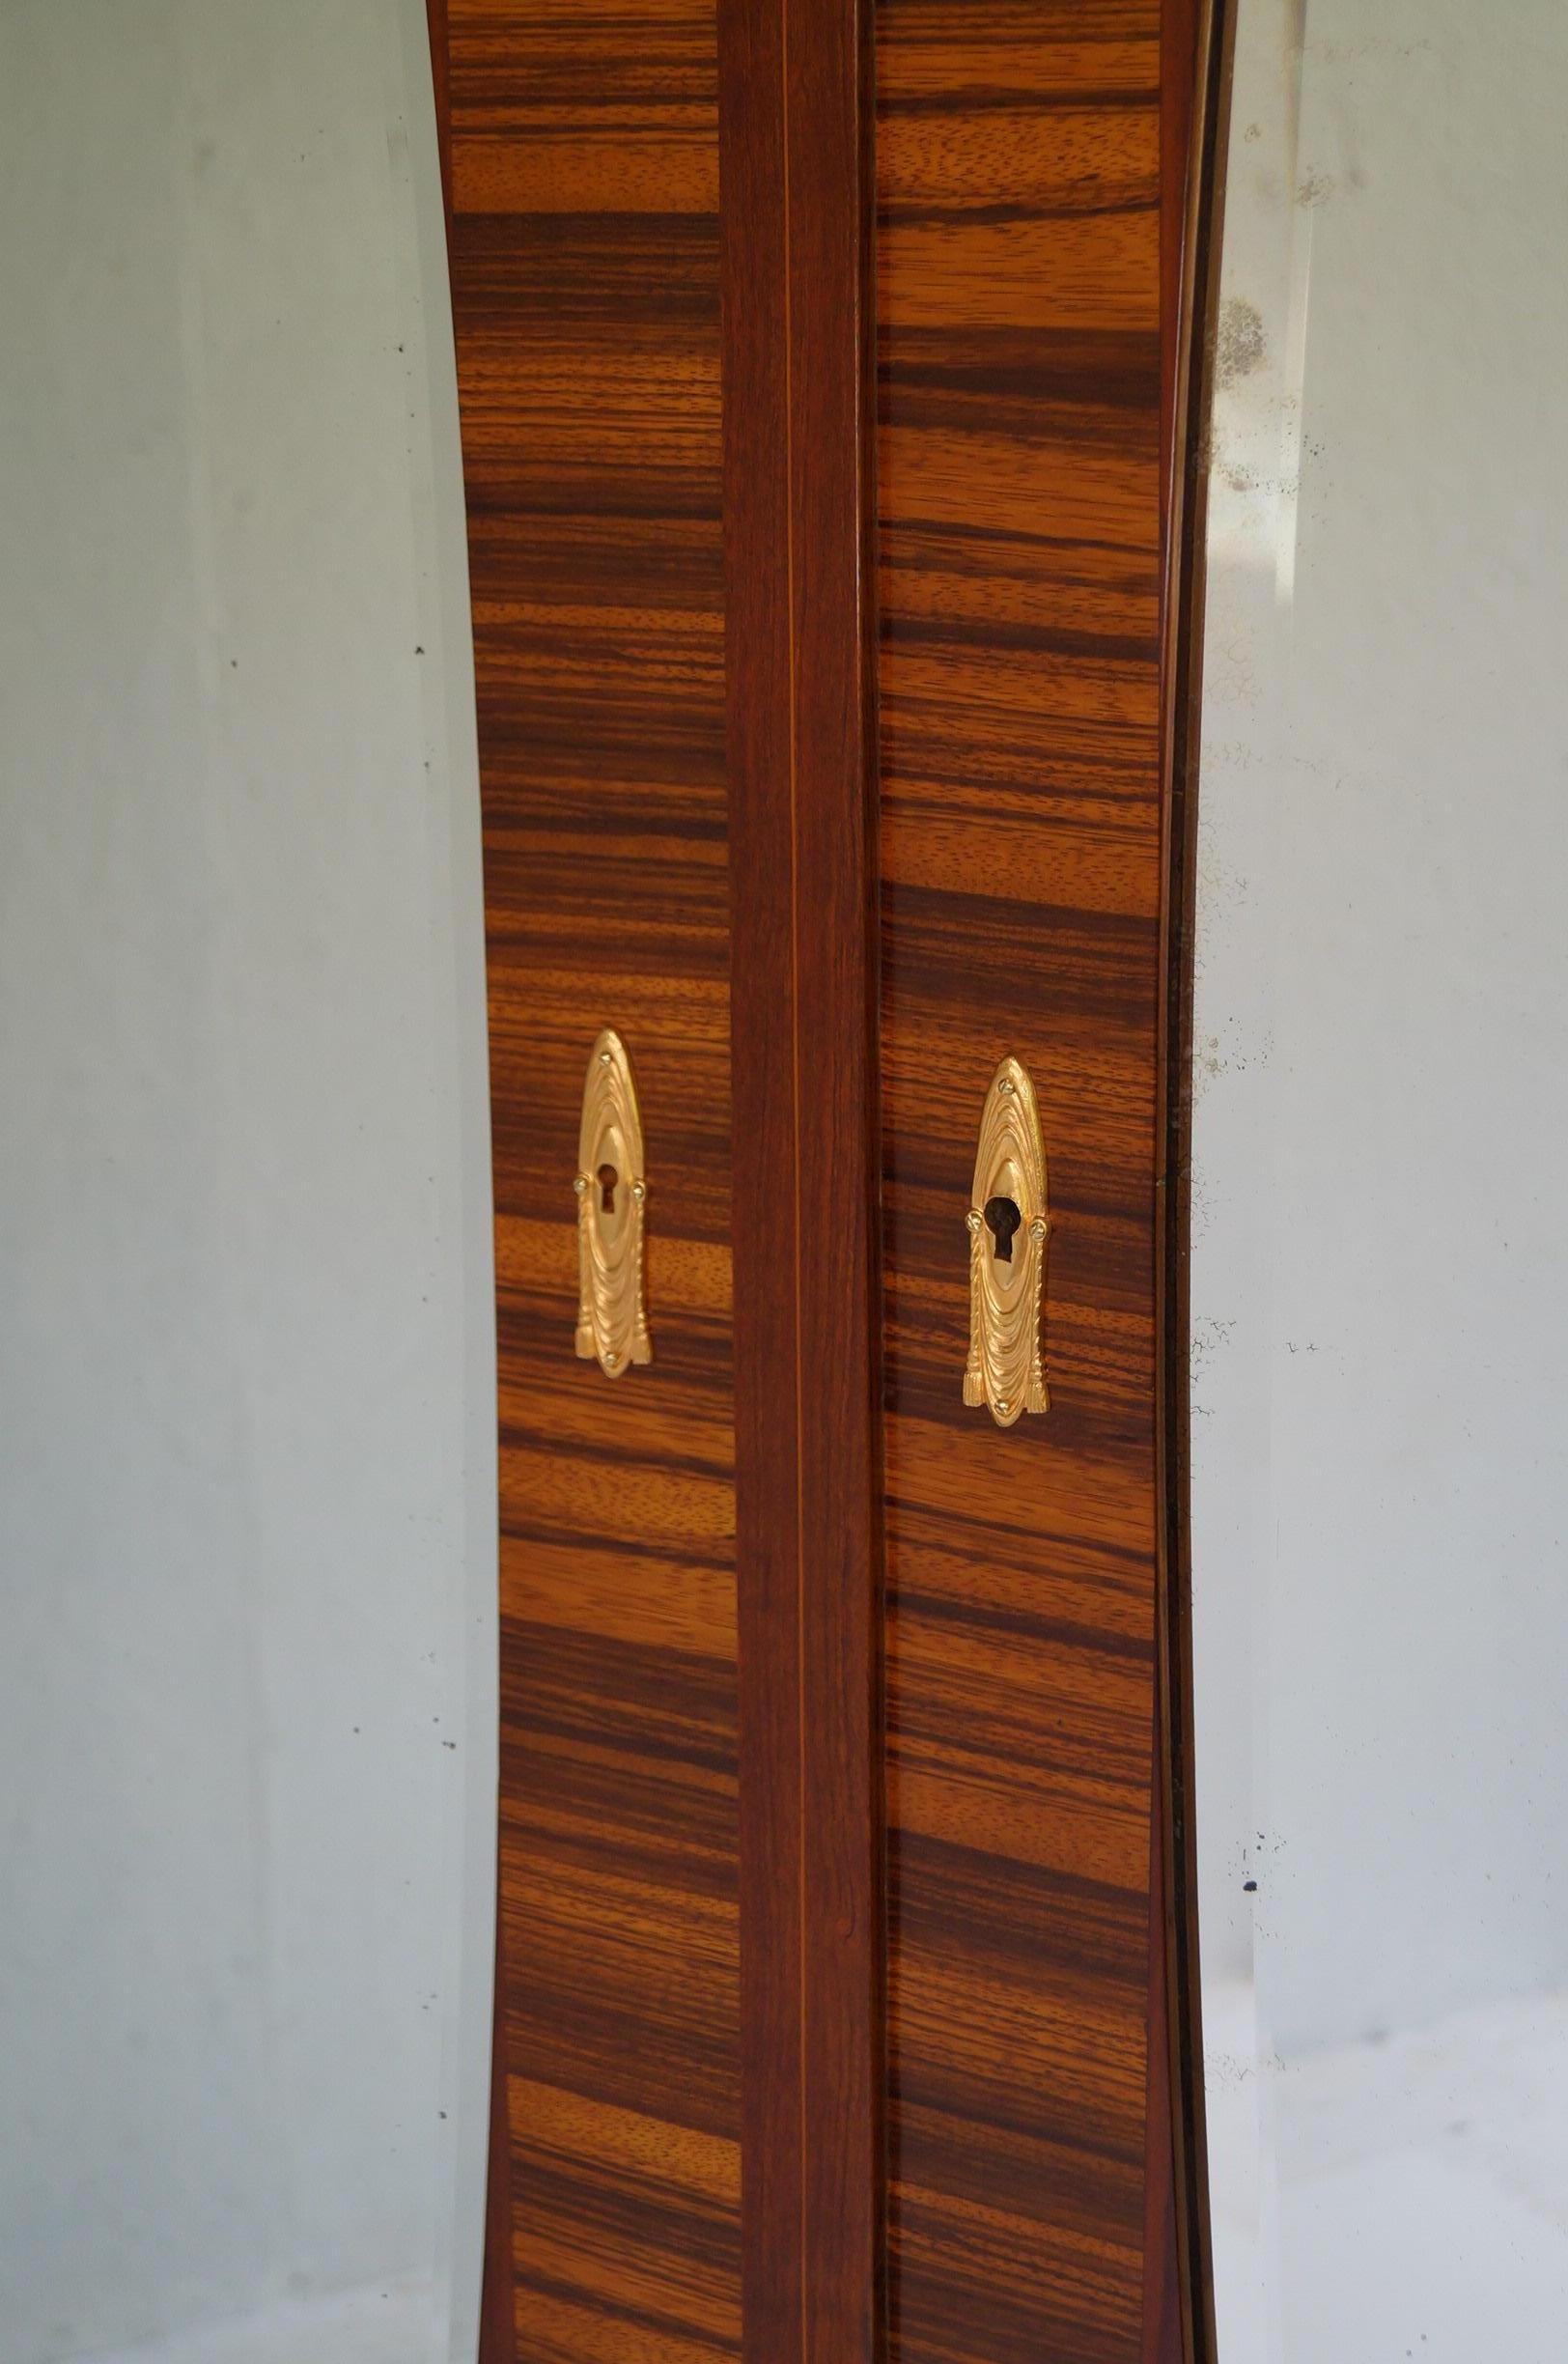 Art Deco Secesja wardrobe we are pleased to present the Polish Secession of 1900s-1910s. The wardrobe was made in Krakow, Poland, it comes from the Krakow Center, it was made of elmwood. The wardrobe was renovated, it was cleaned to bare veneer, and